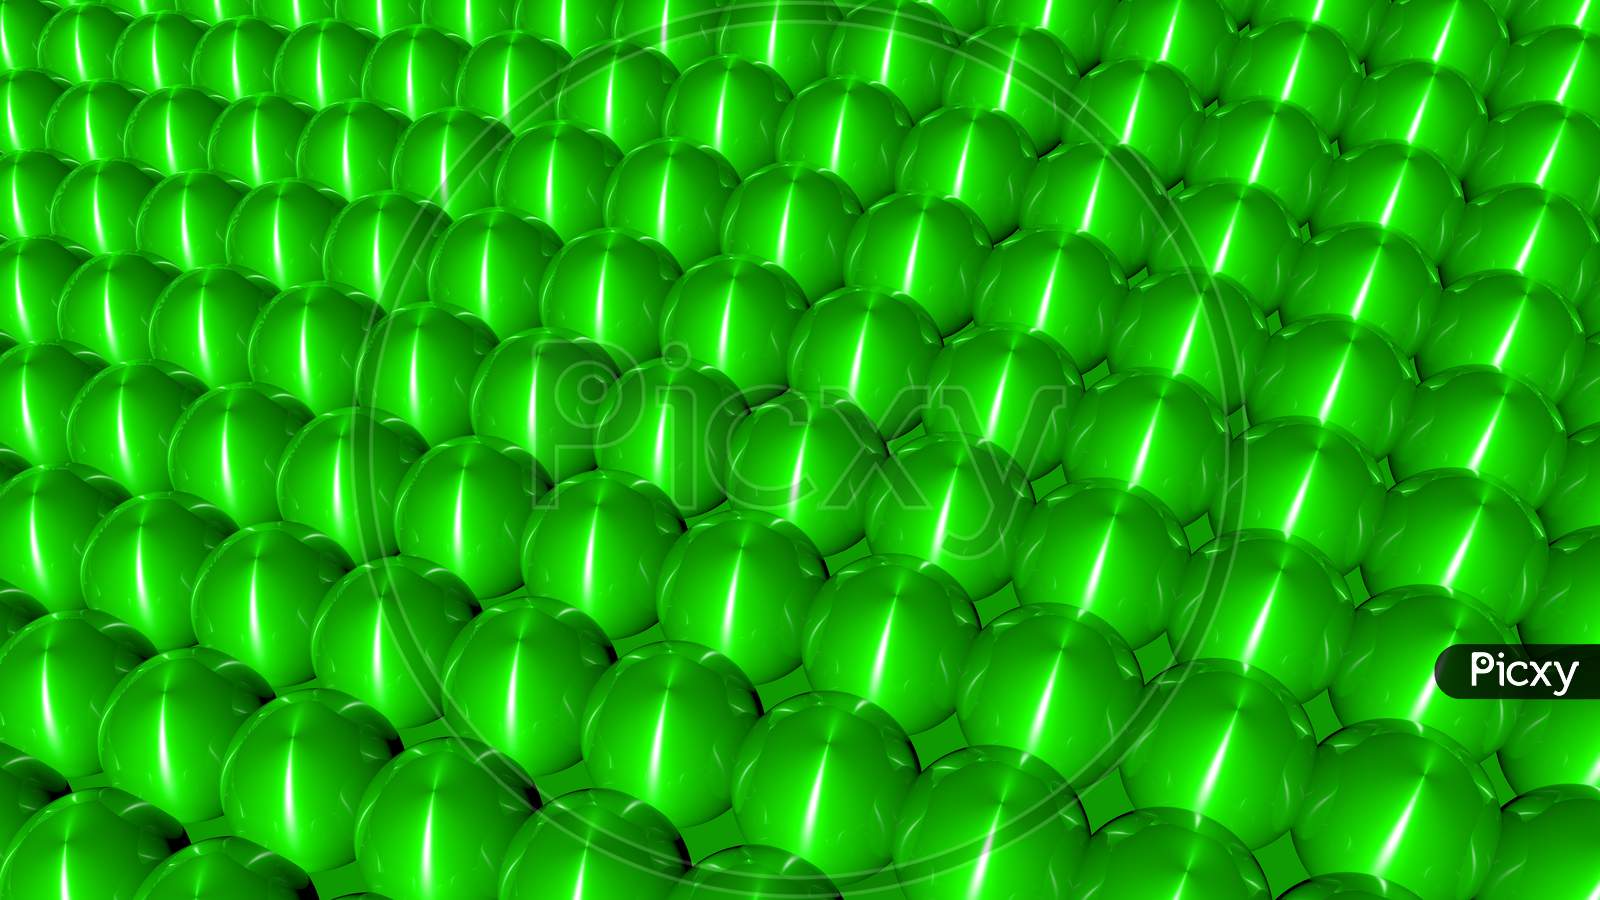 Bright Colorful, Dynamic And Shiny Solid Spheres Floating In A Wavy Background.